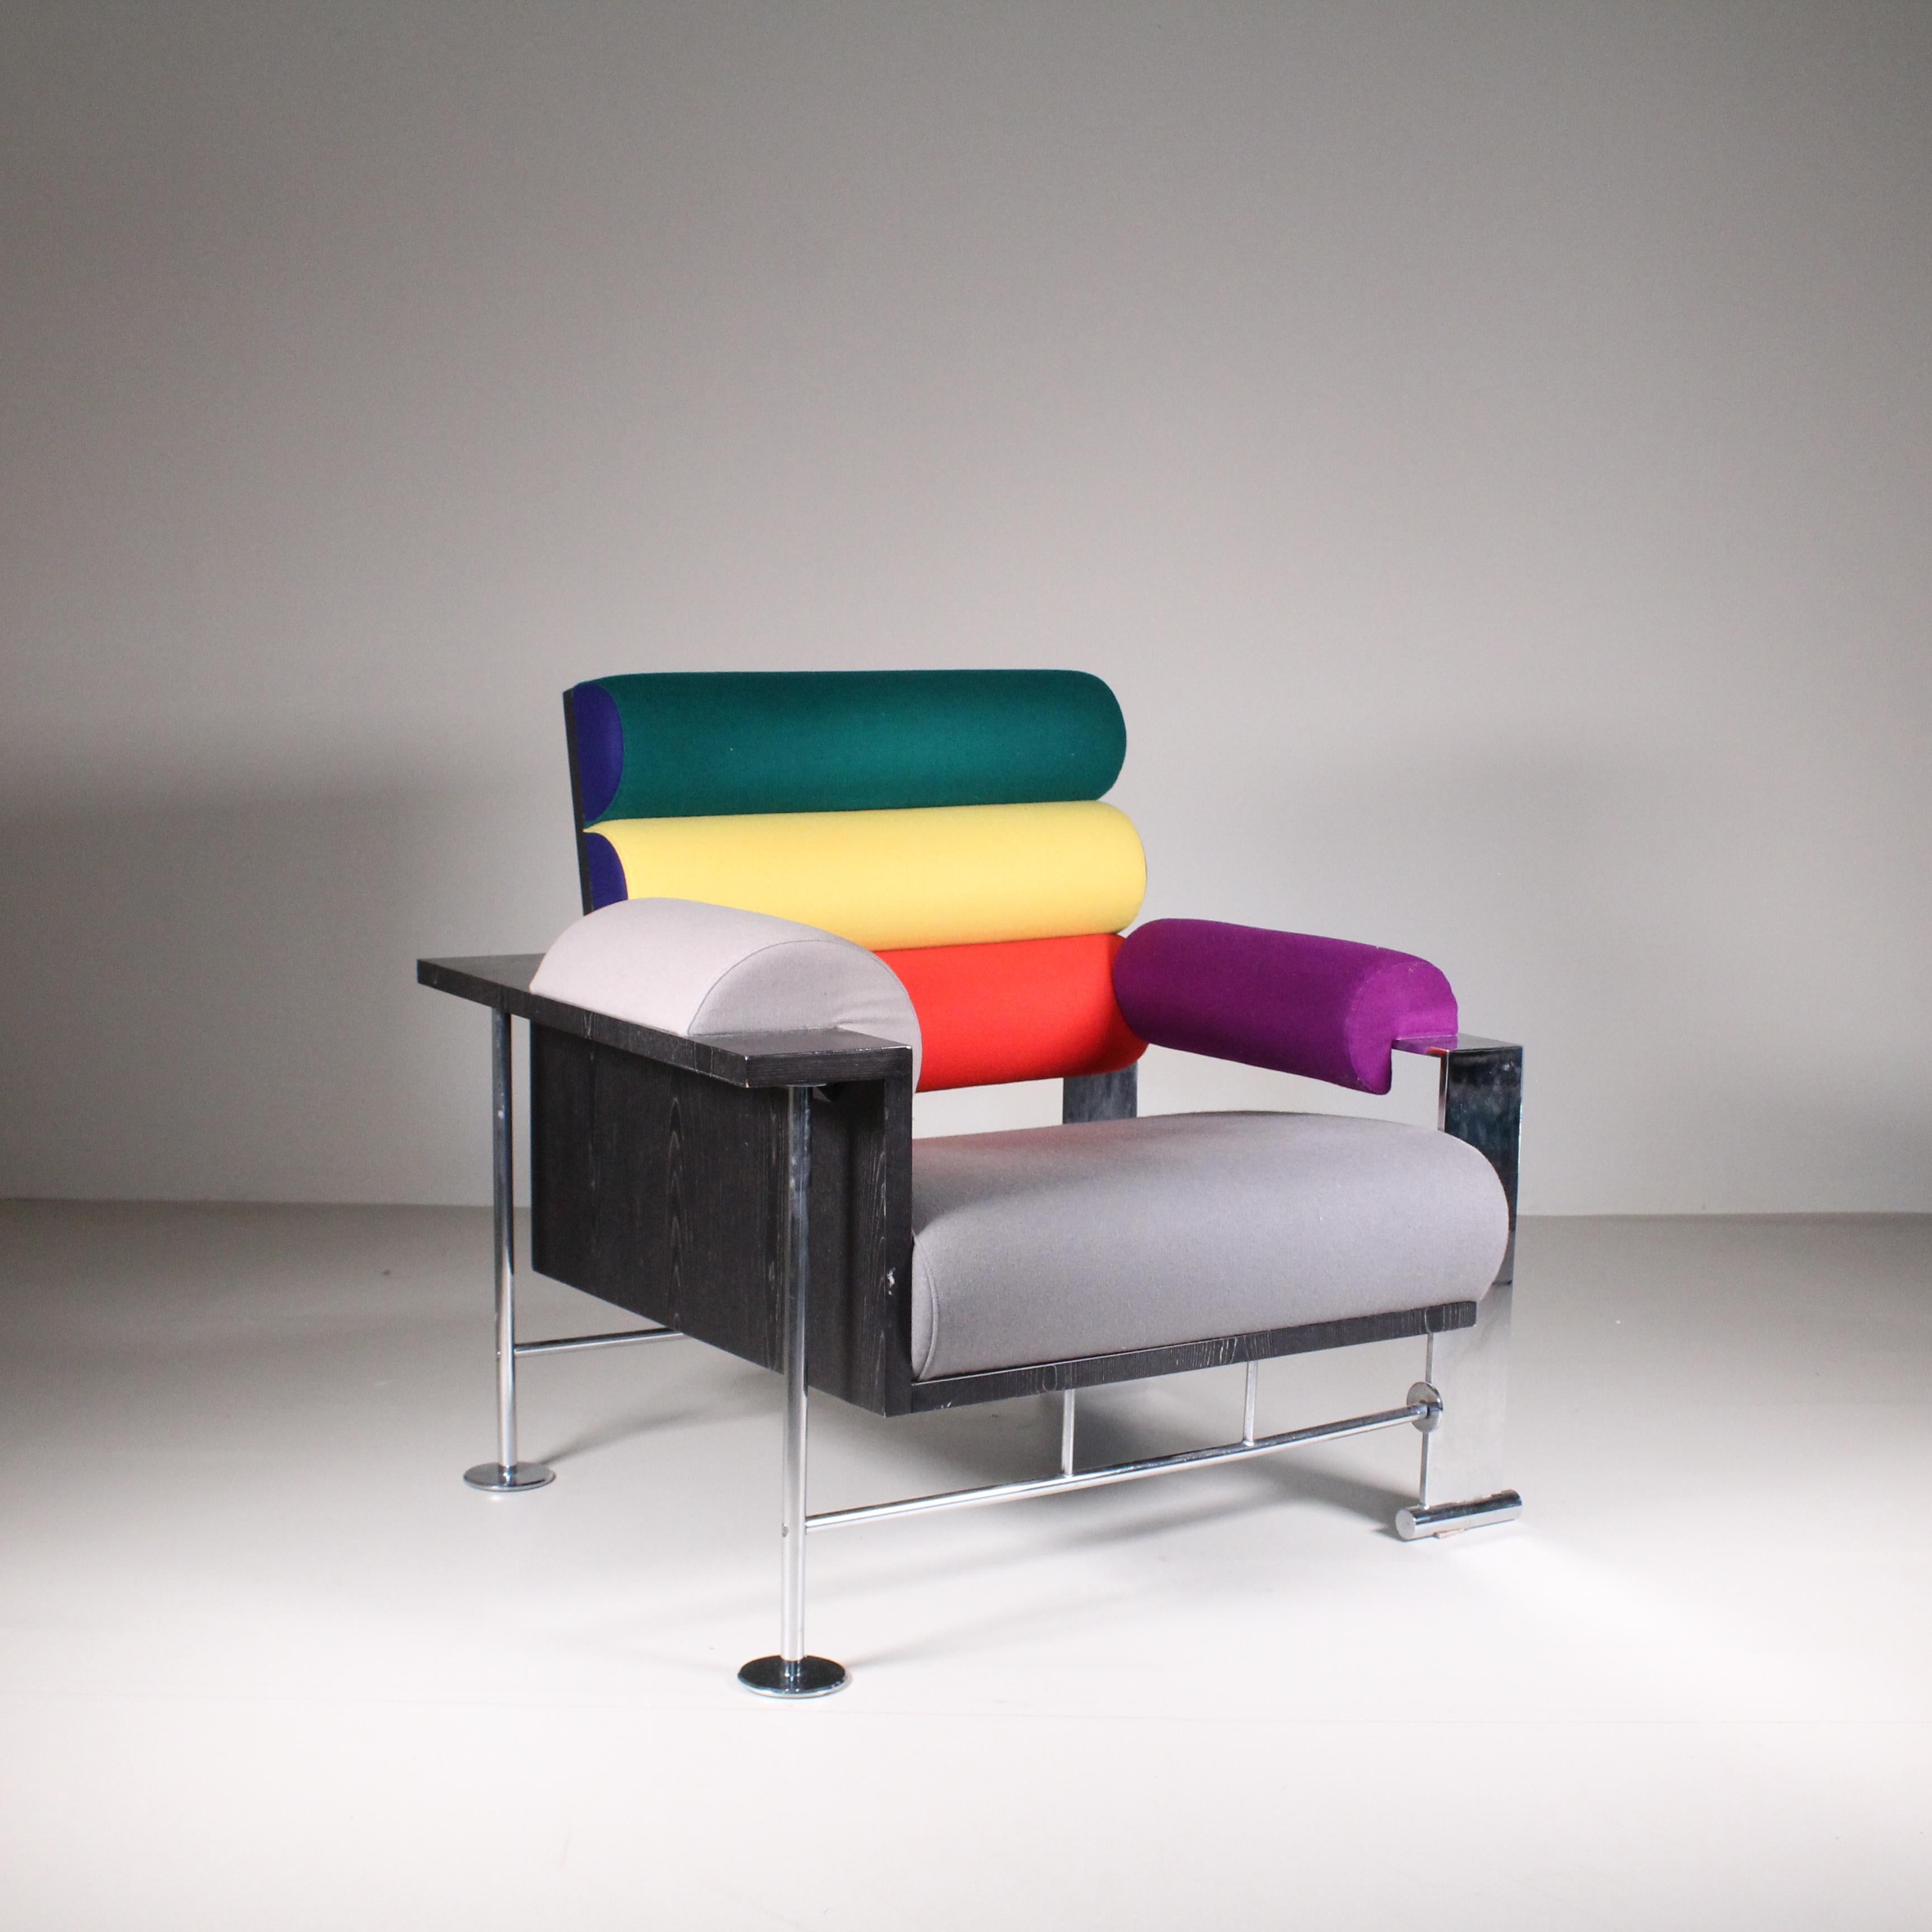 Las Vegas armchair by Peter Shire, 1988 For Sale 6